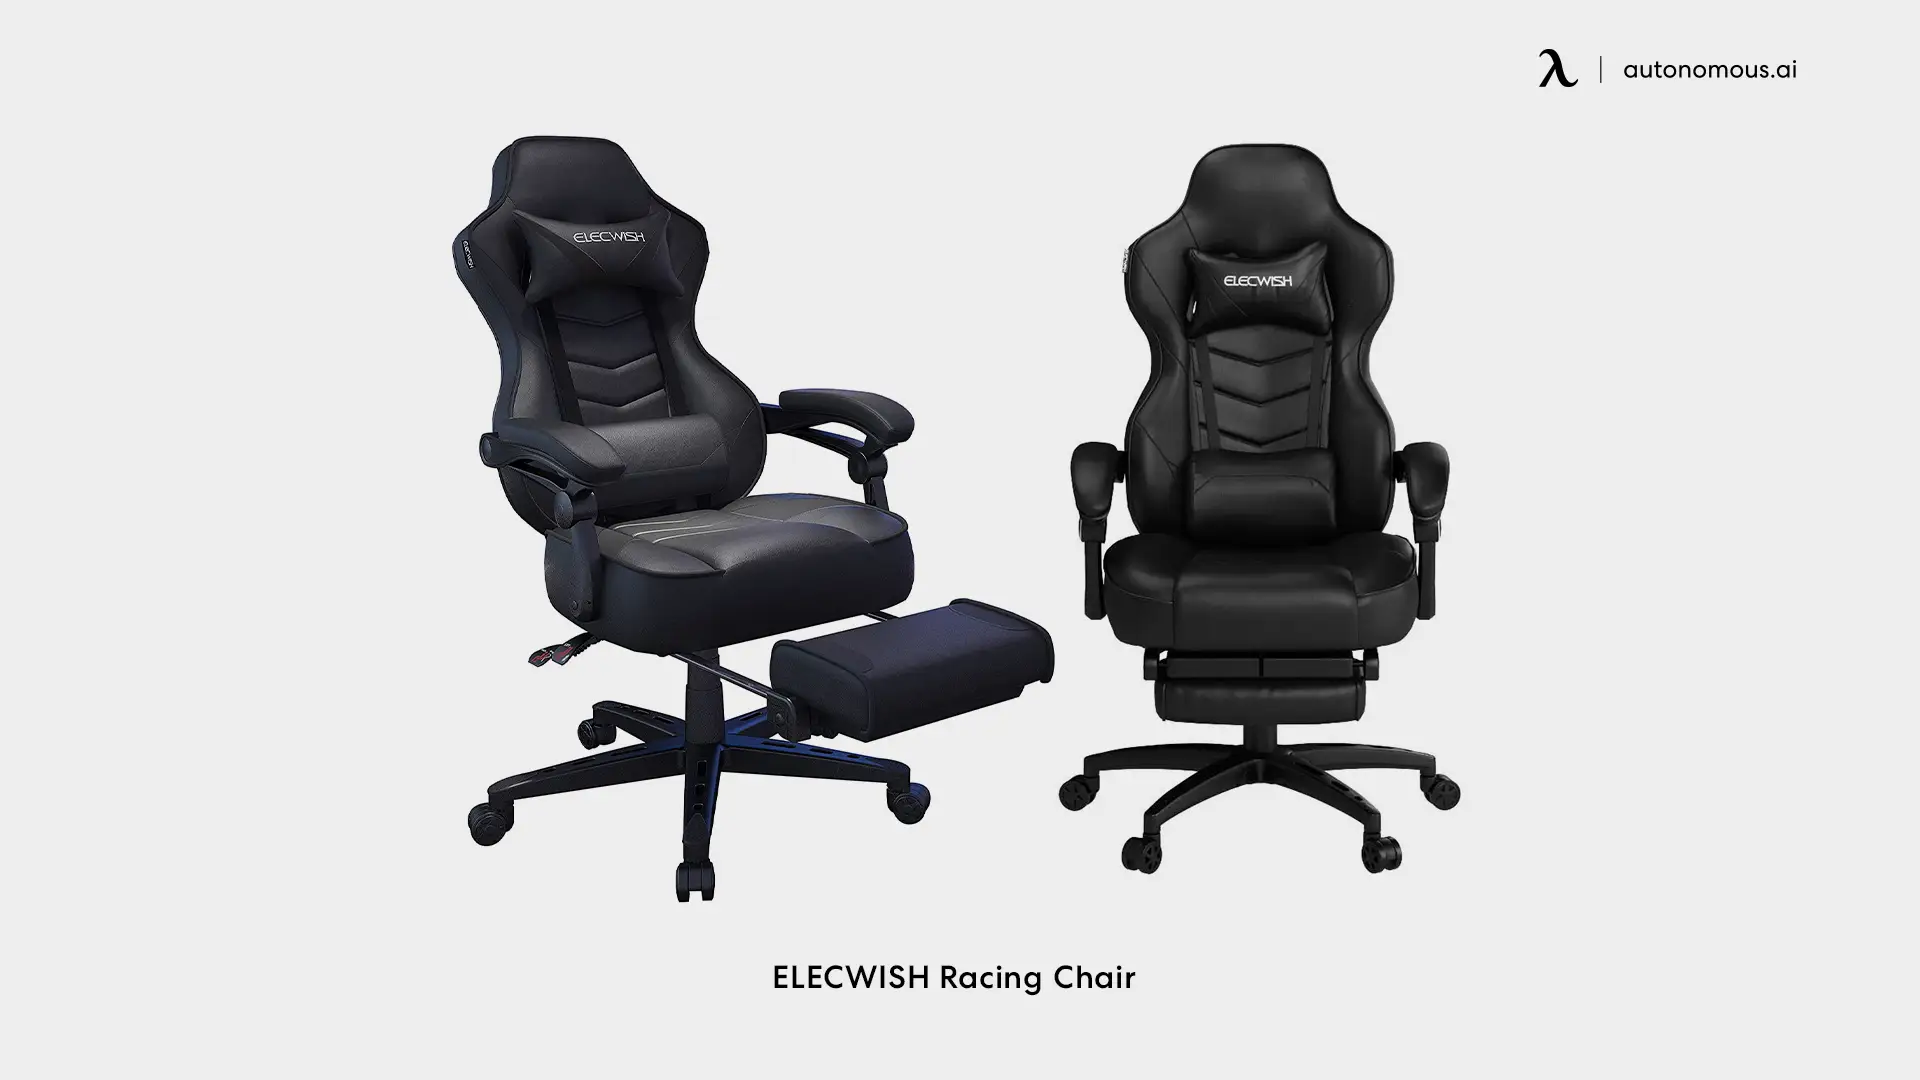 ELECWISH Racing Chair - big and tall gaming chair